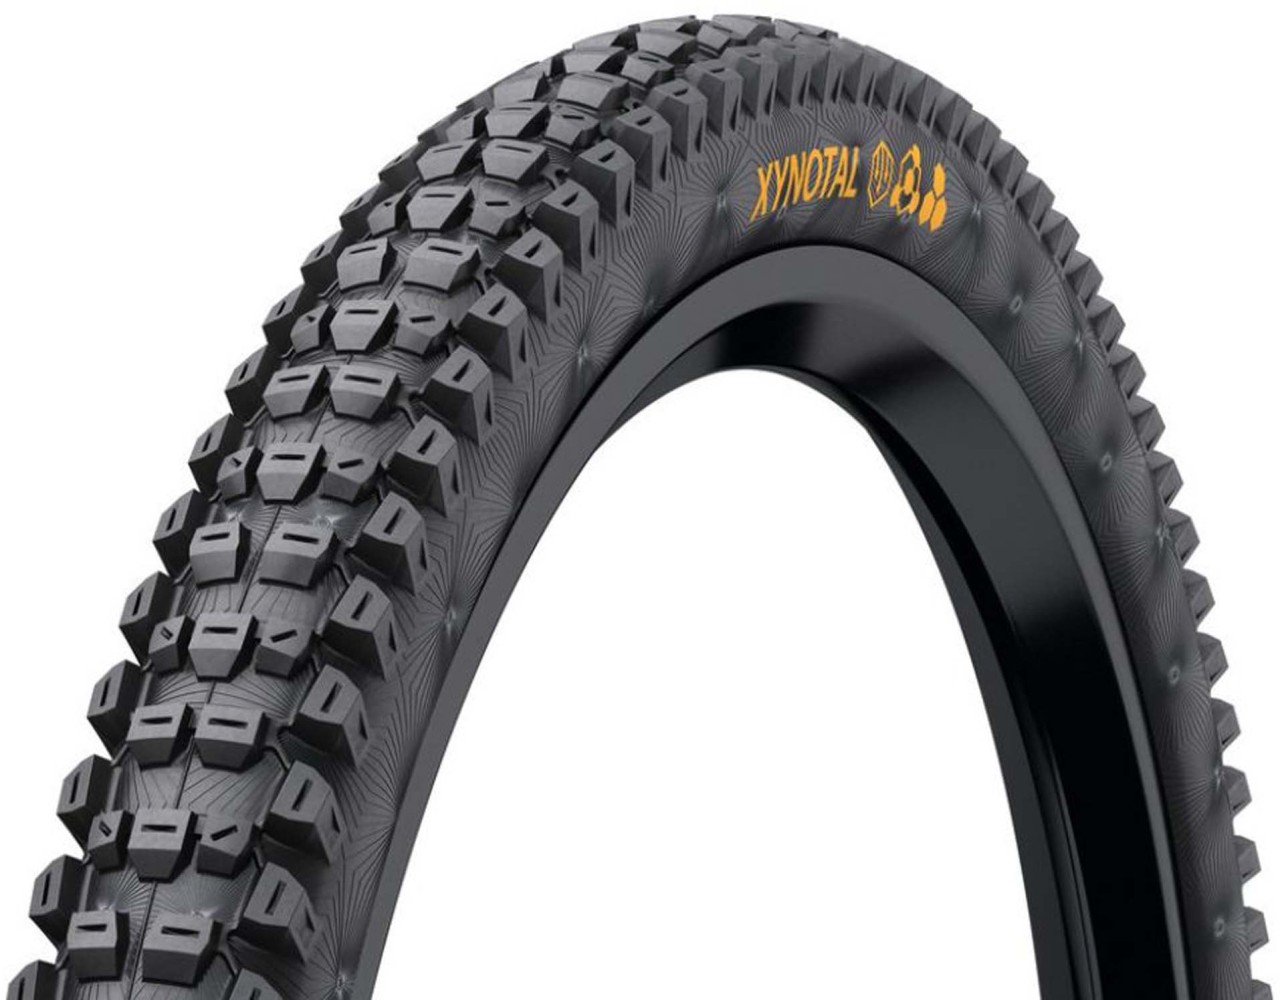 Continental Pneus Xynotal 29 x 2,40 Soft-Compound Downhill-Casing